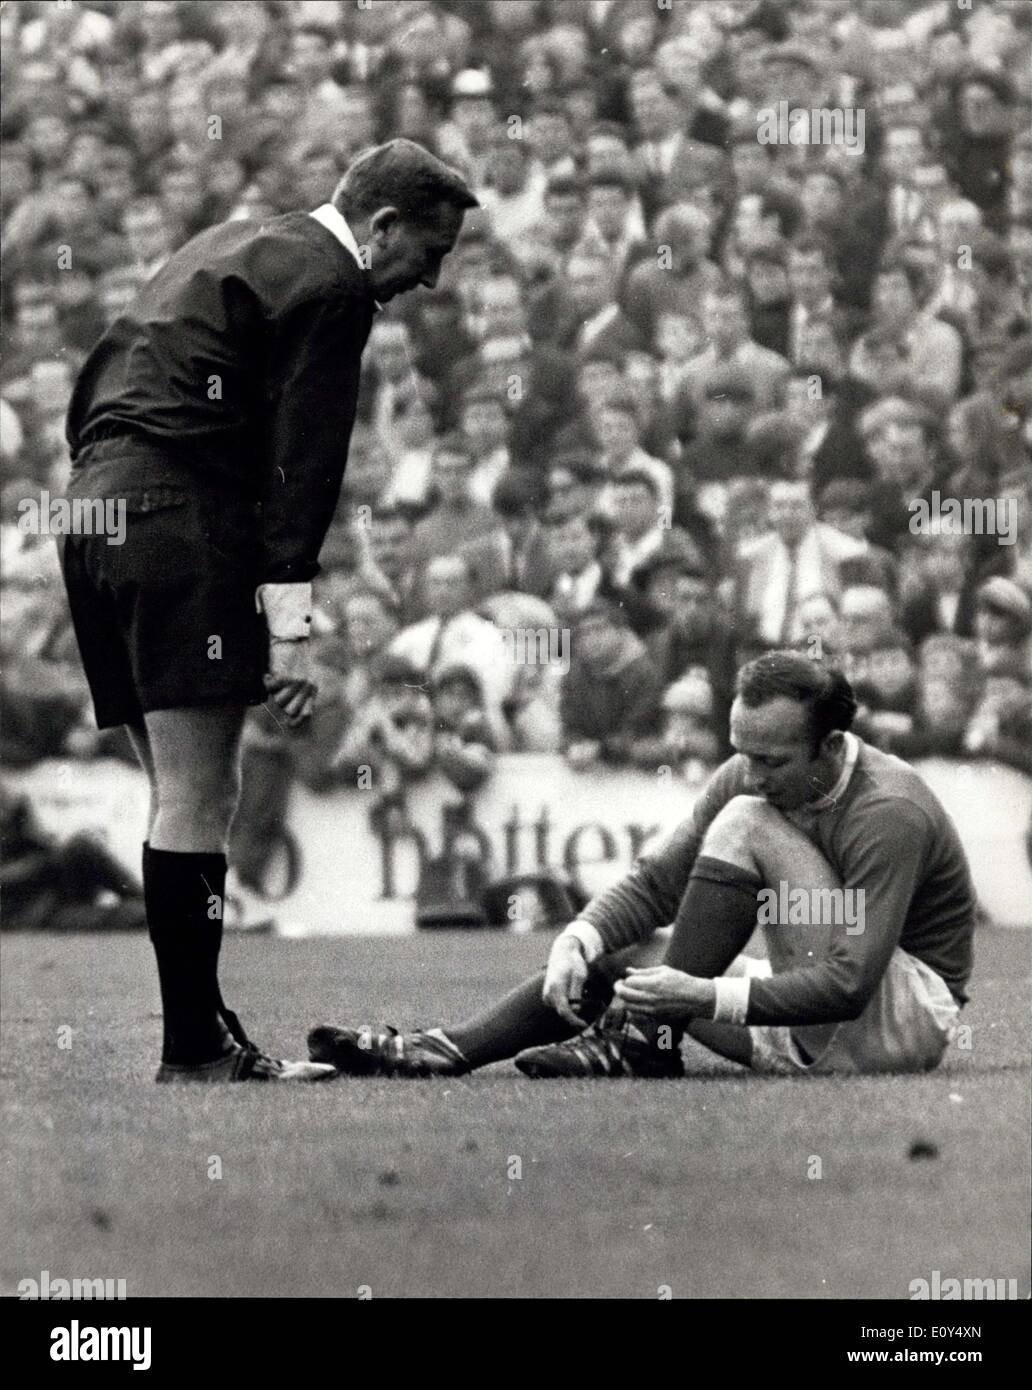 Oct. 26, 1968 - QUEENS PARK RANGERS VERSUS MANCHESTER UNITED AT LOFTUS ROAD. PHOTO SHOWS: NOBBY STILES, of Manchester United, lost his boot after taking a swipe at the ball - and is seen here as referee MR. JOHNSON tells him to get a move on while putting the boot back on. Stock Photo